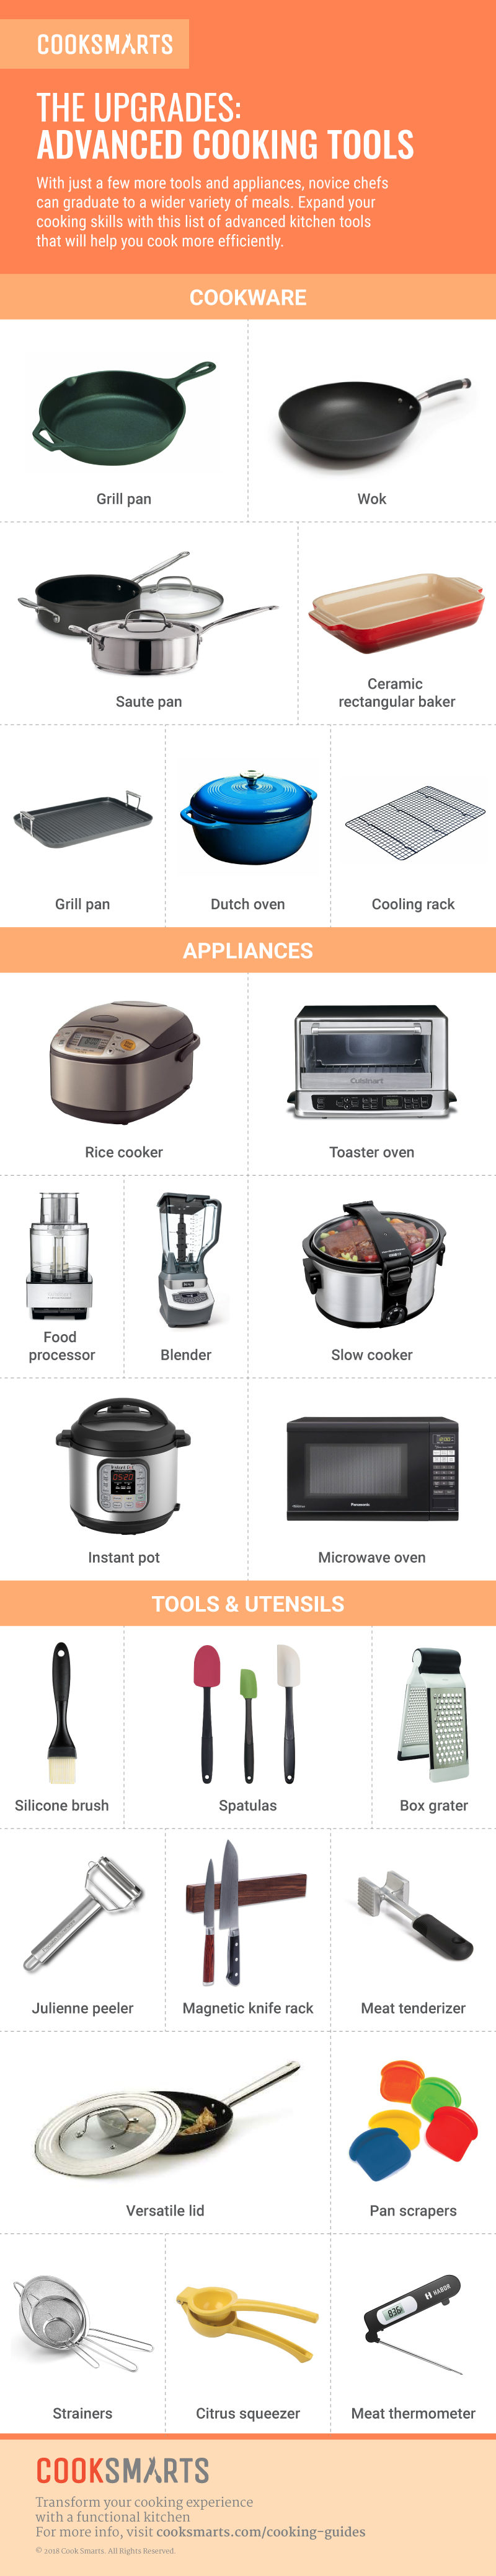 25 Advanced Essential Cooking Tools to Upgrade Your Kitchen | Cook Smarts Infographic